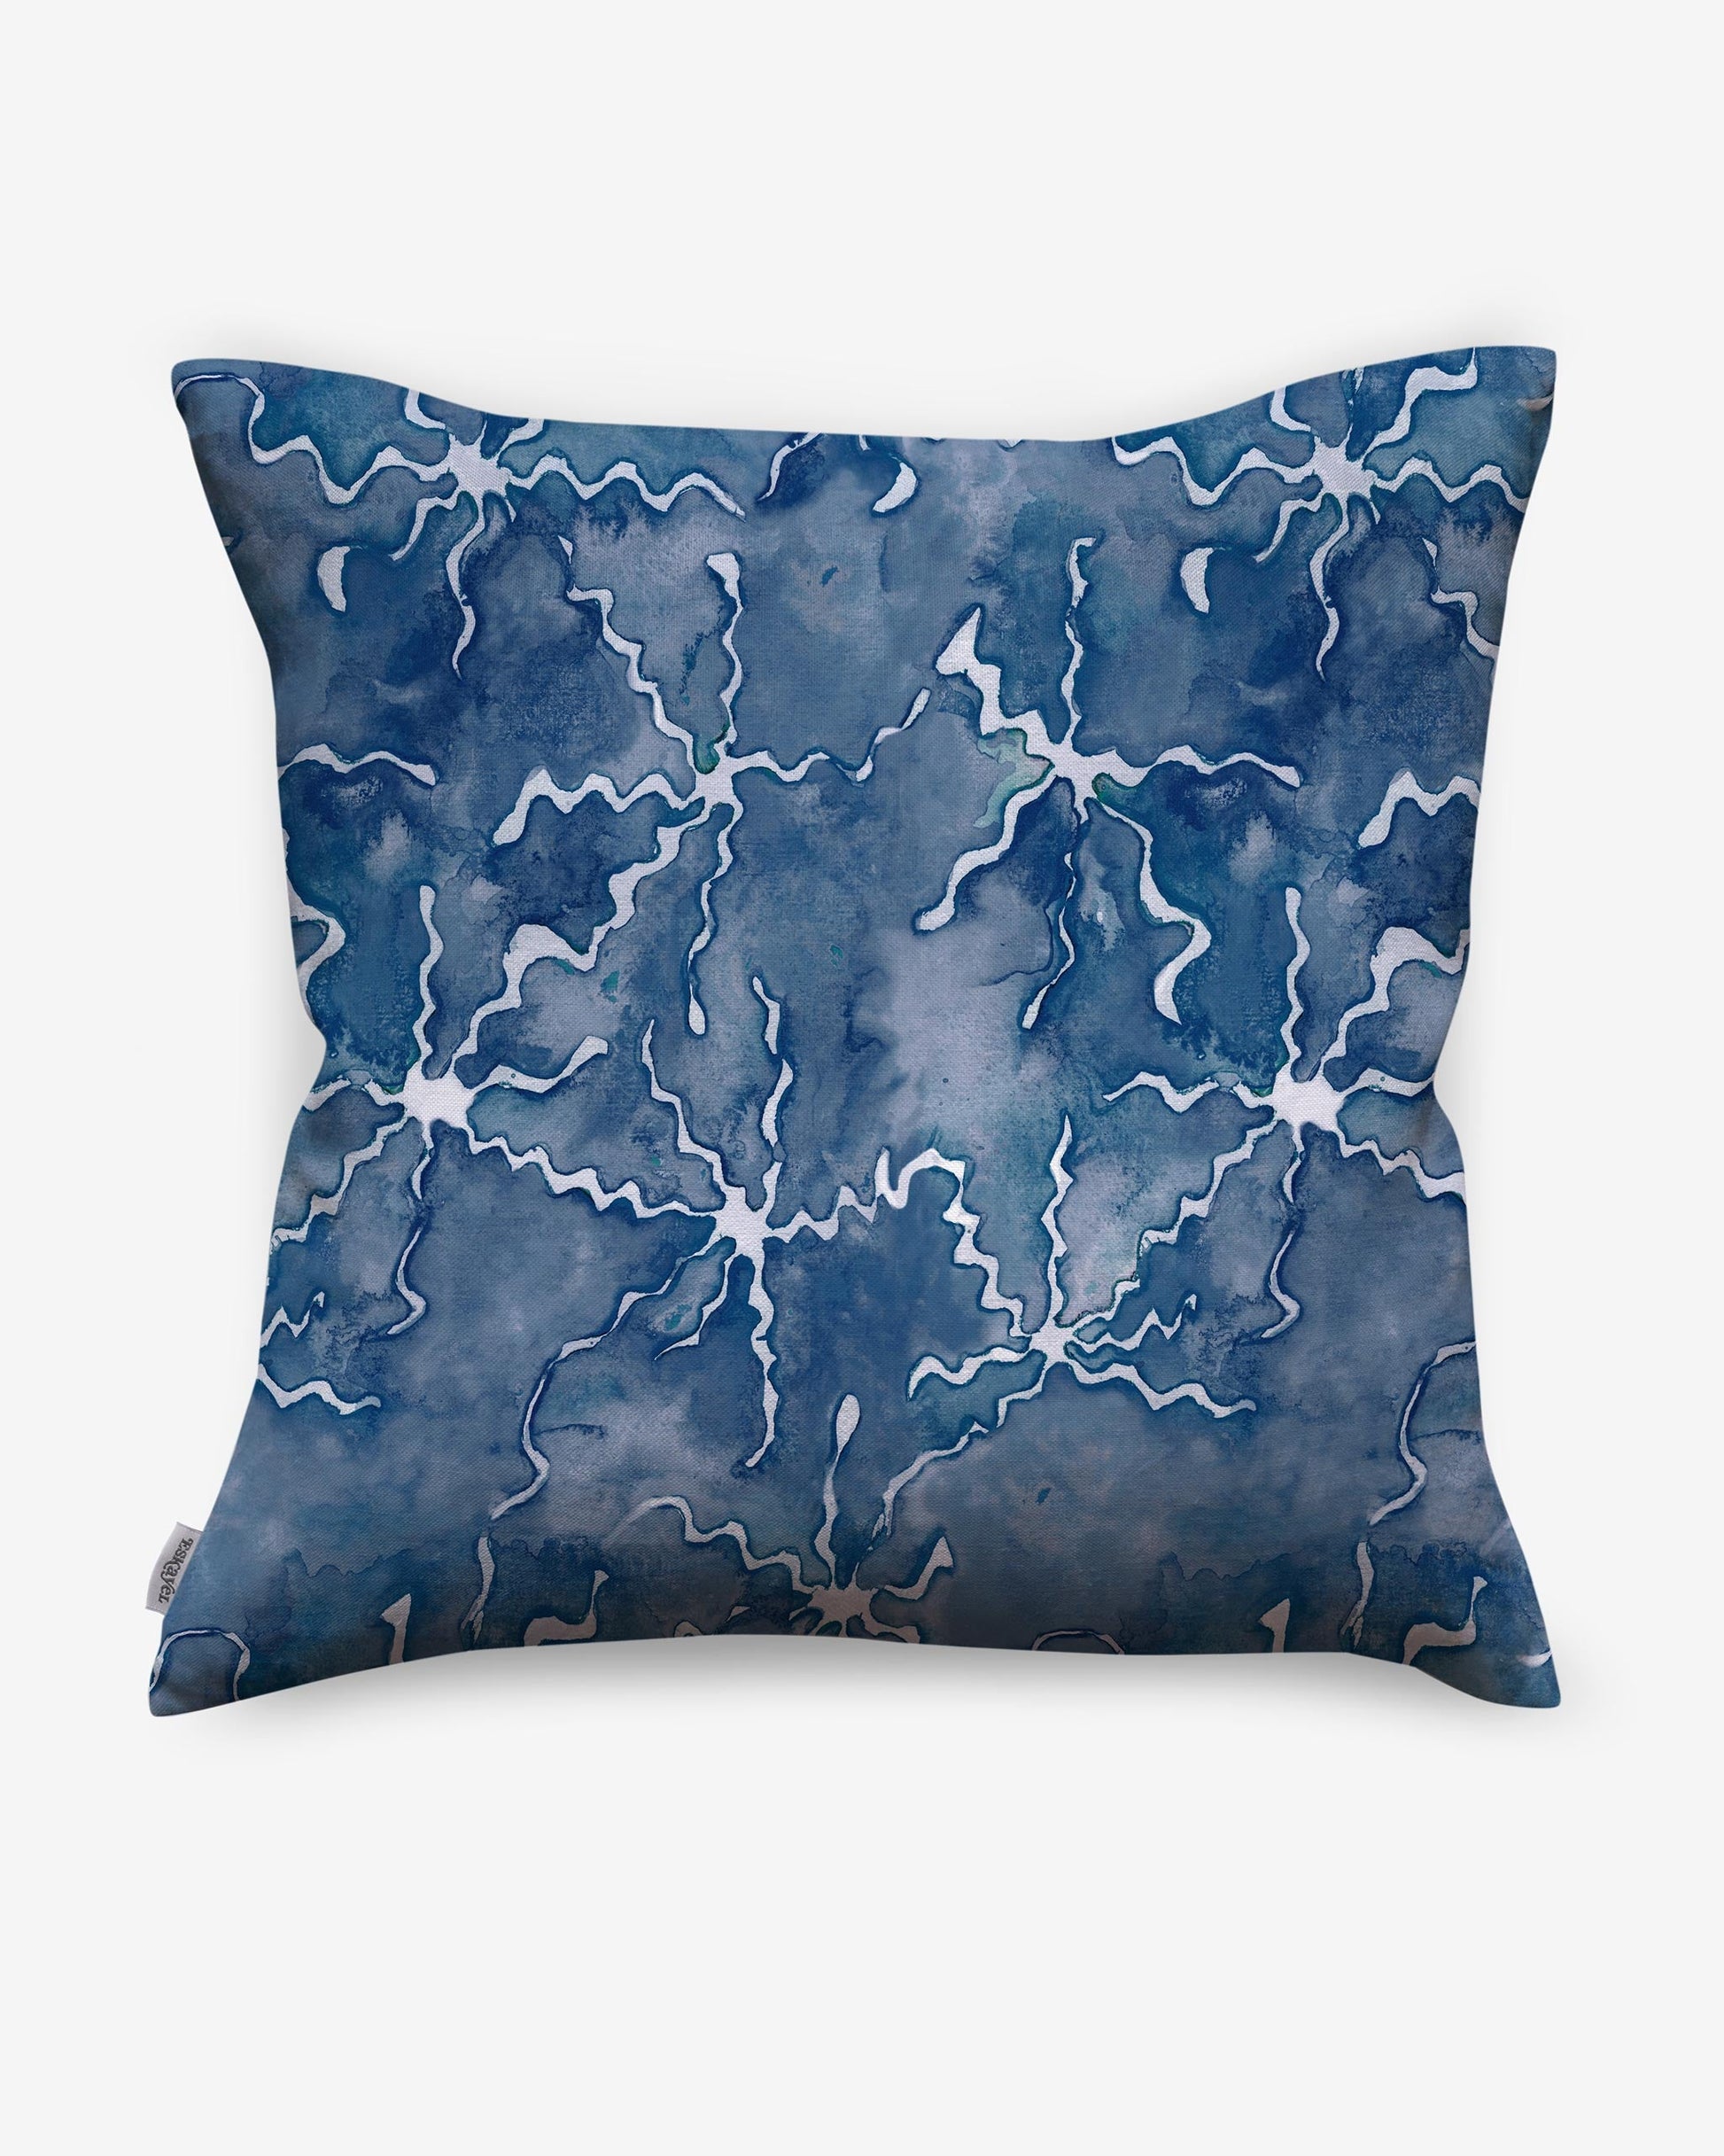 A Nuit pillow with a blue and white pattern on it using resist dye techniques